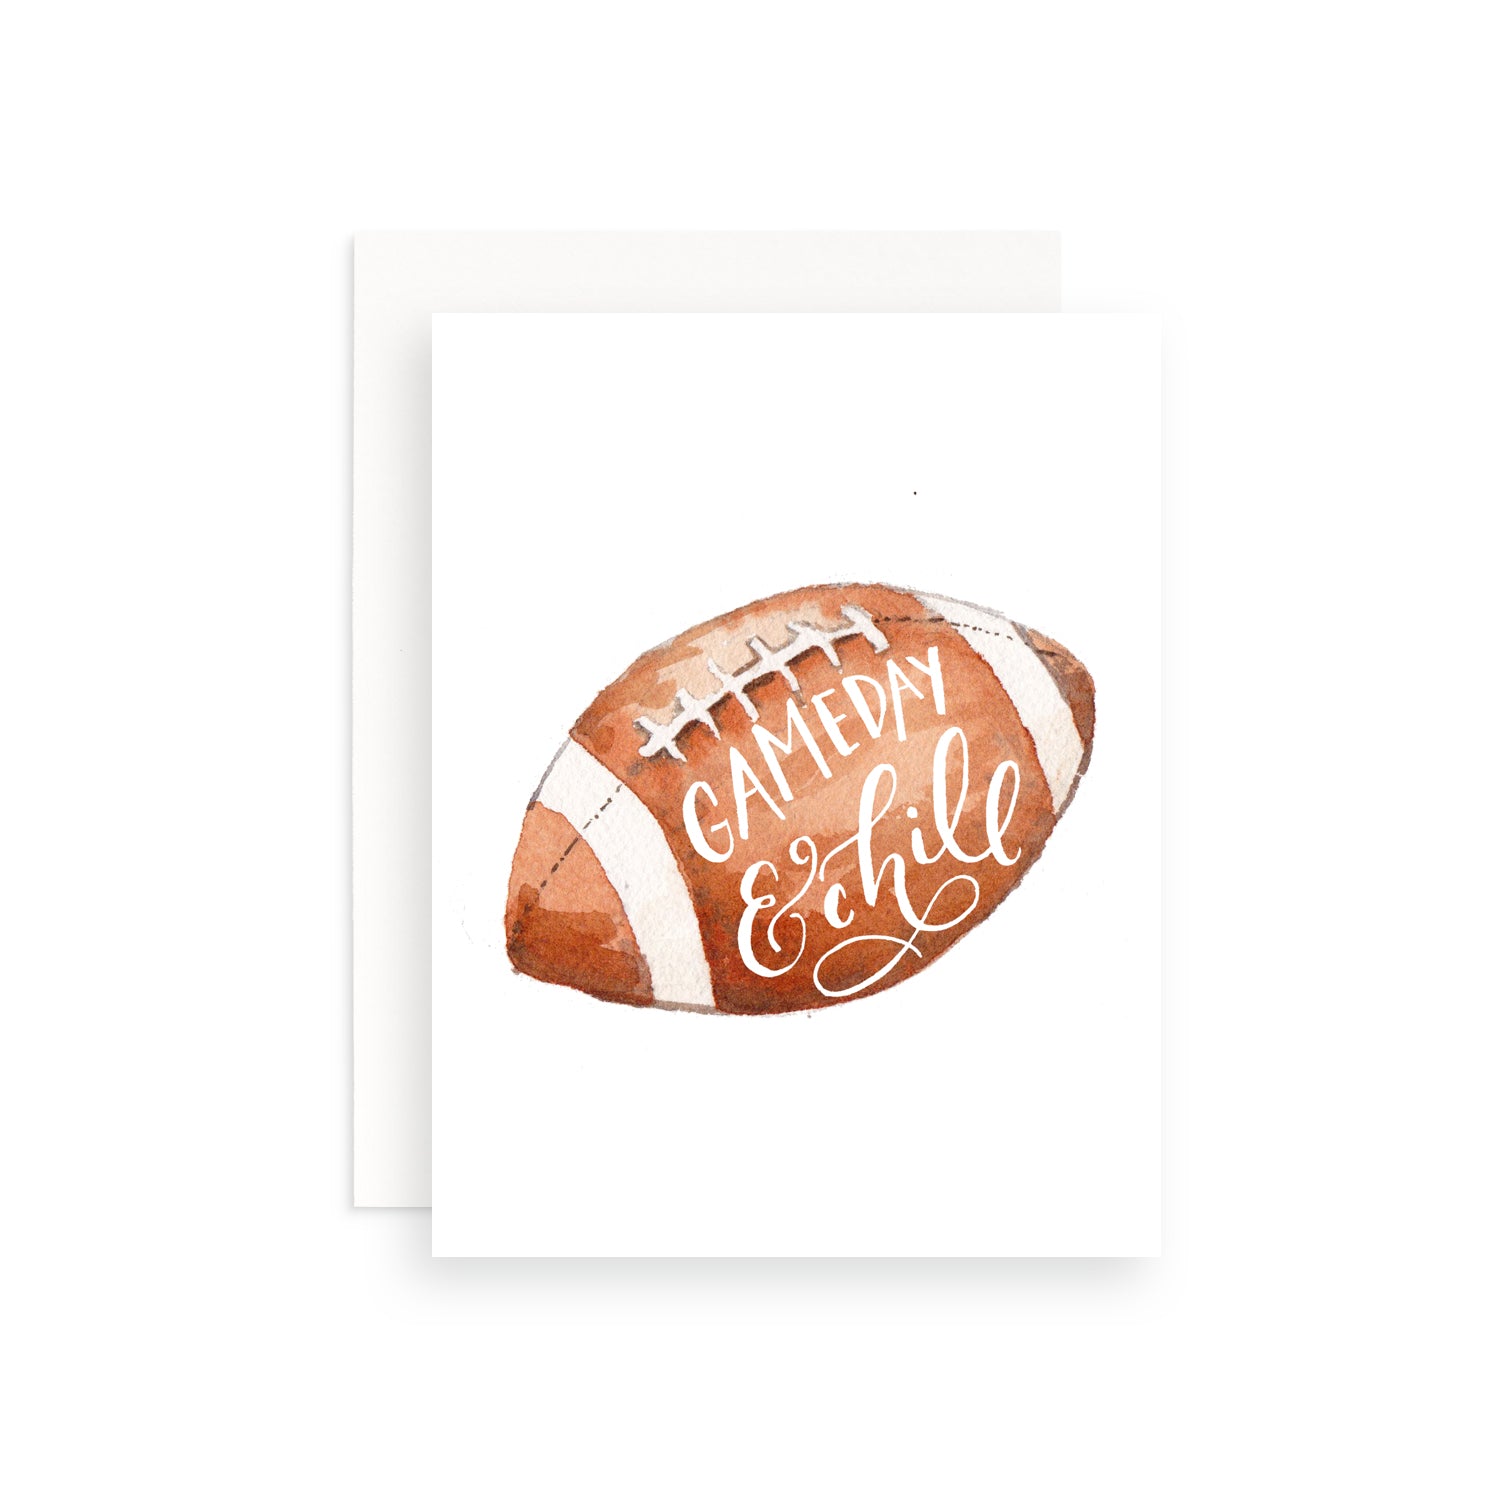 Gameday and Chill Greeting Card